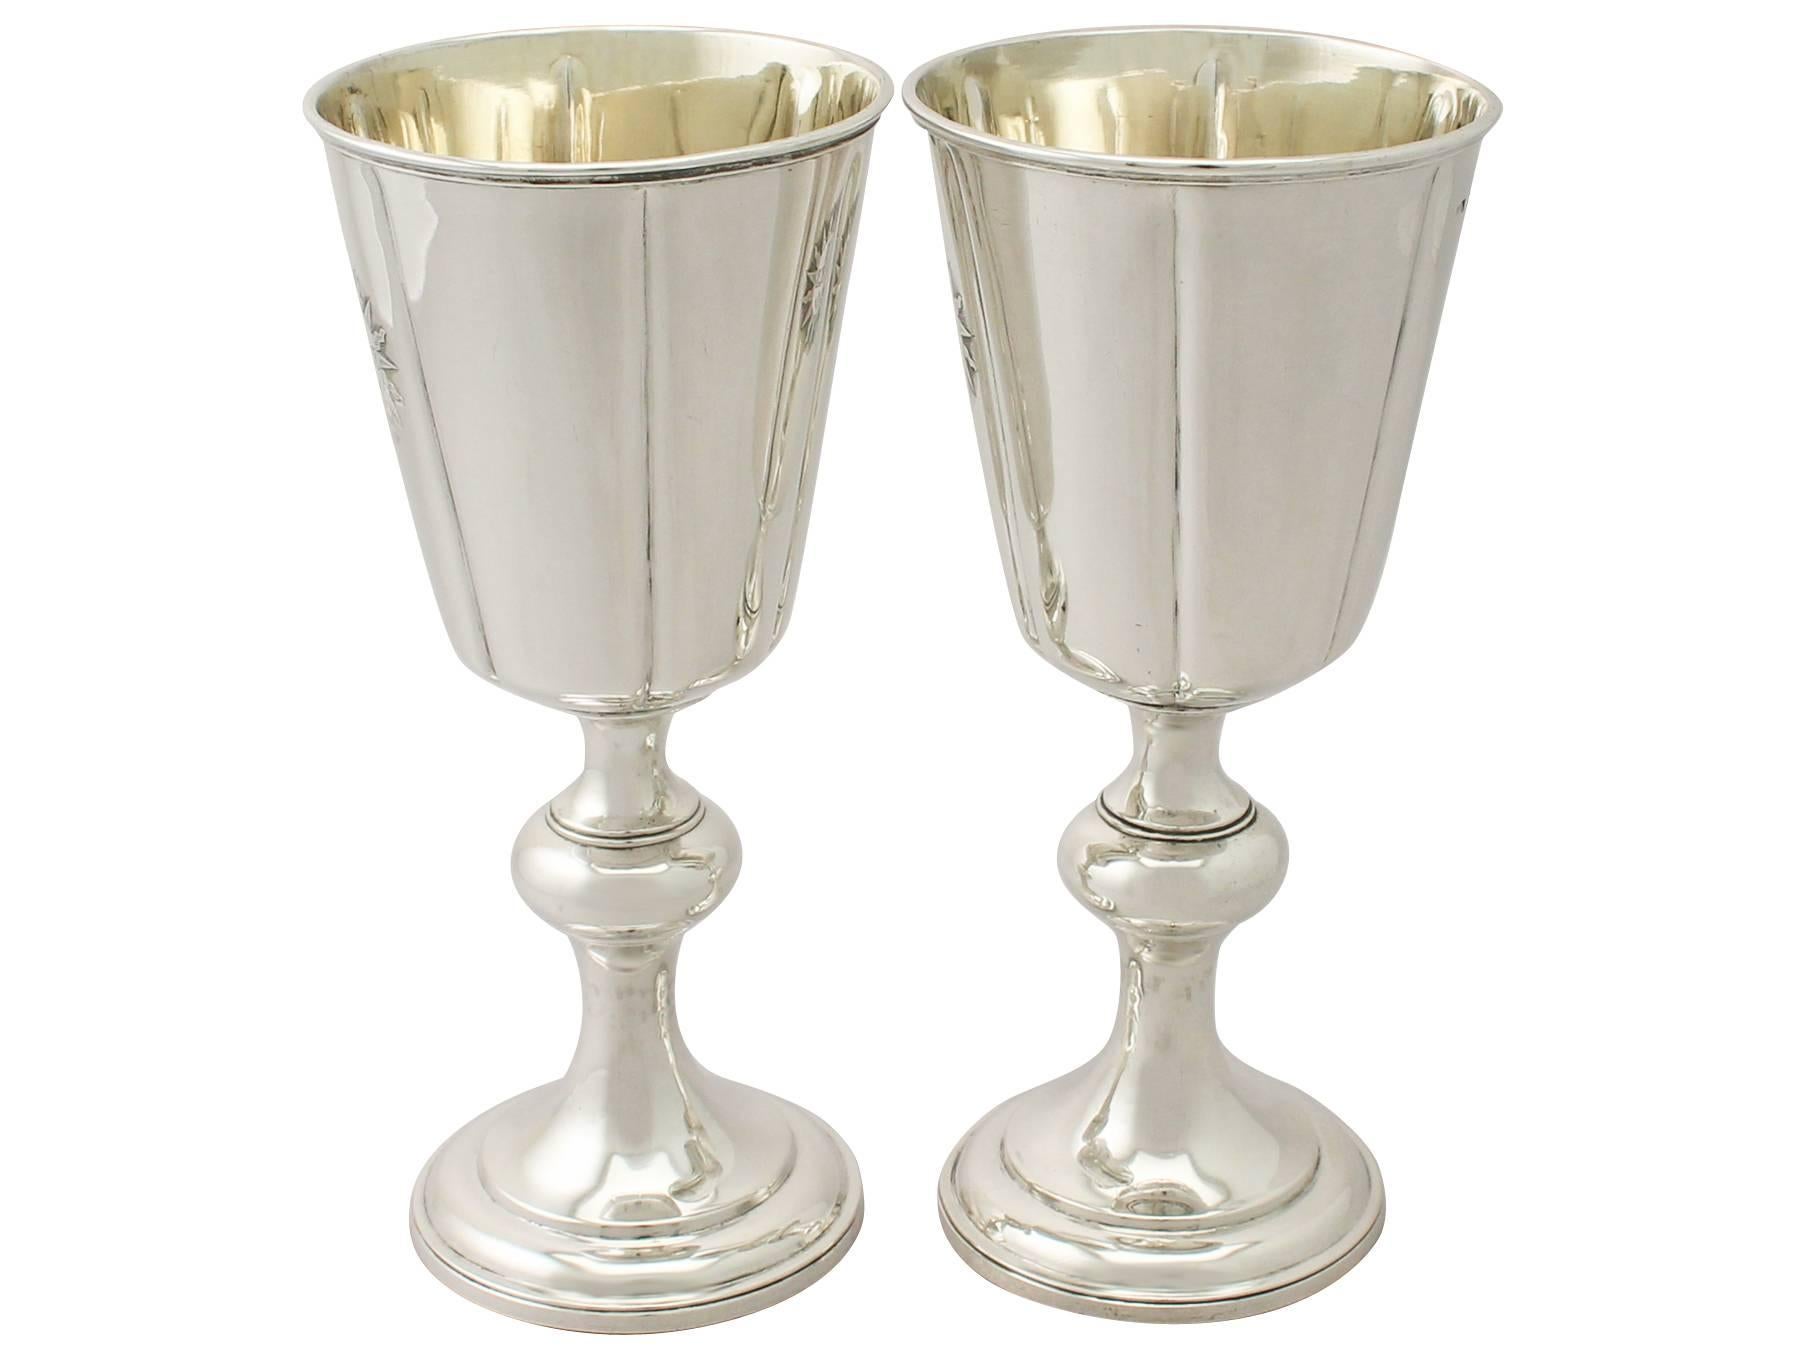 An exceptional, fine and impressive pair of antique Victorian English sterling silver chalices, an addition to our religious silverware collection

These exceptional antique Victorian English sterling silver chalices have a circular tapering bell